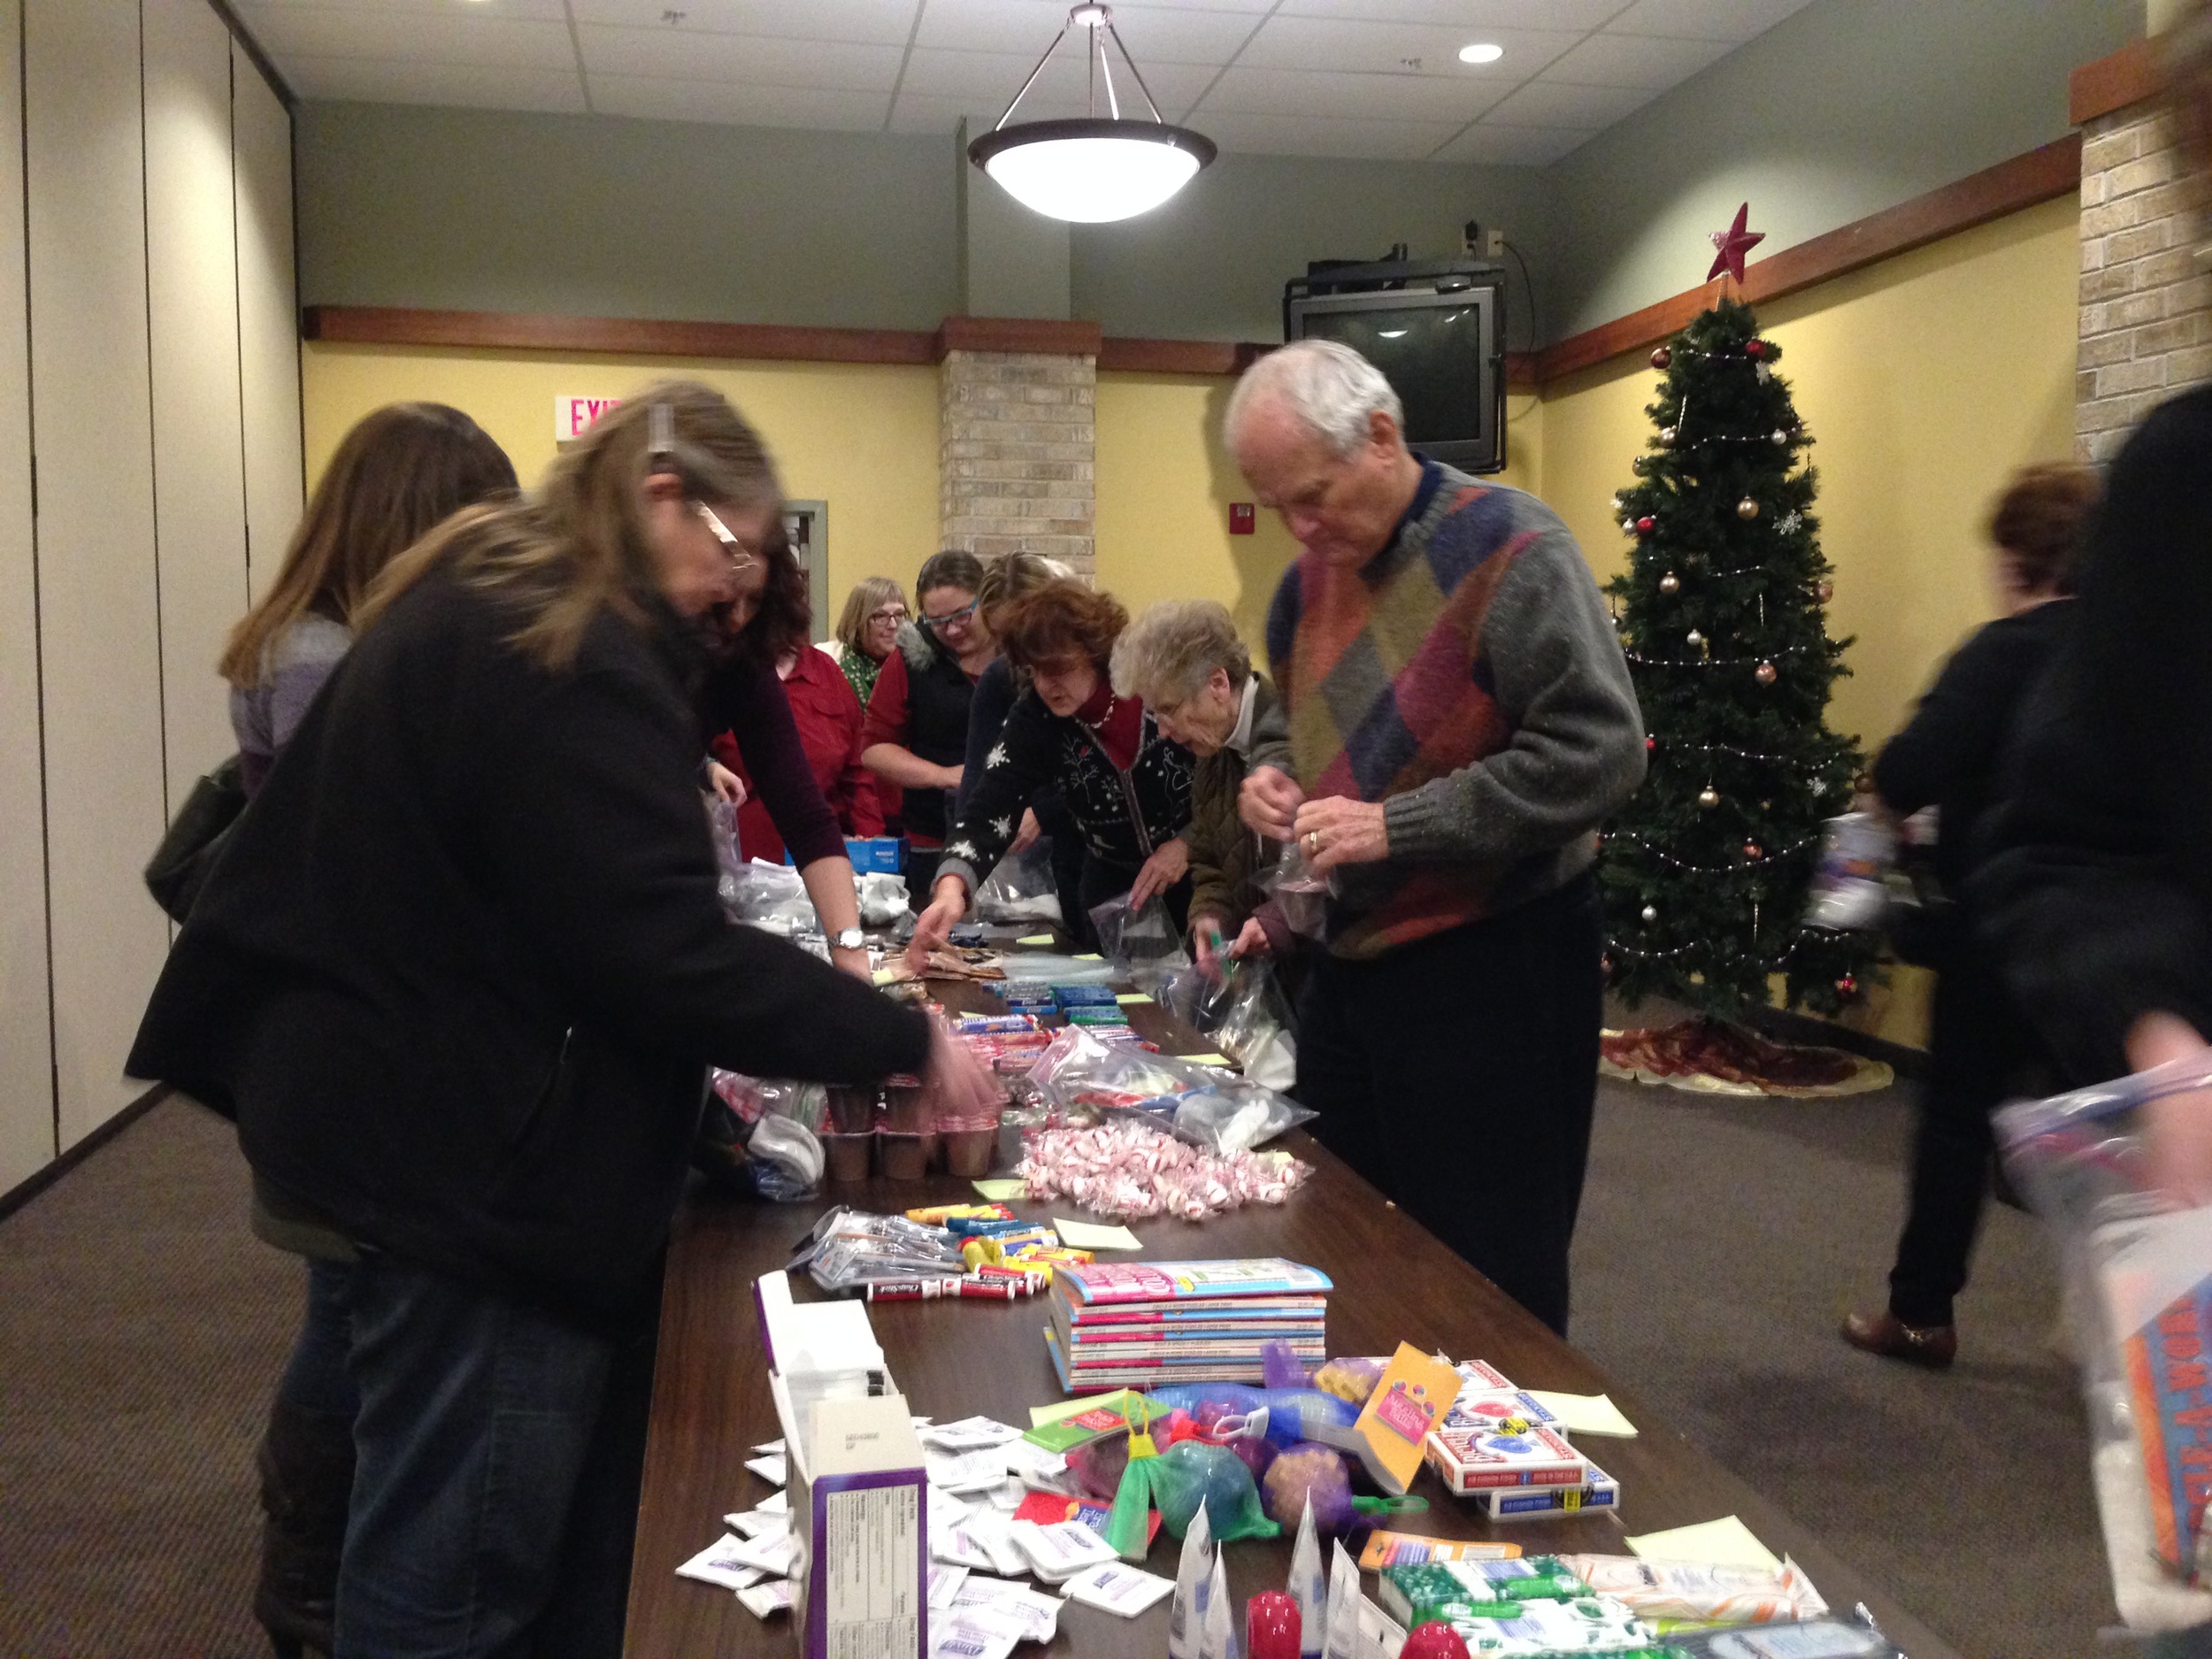 Stuffing care bags for Troops